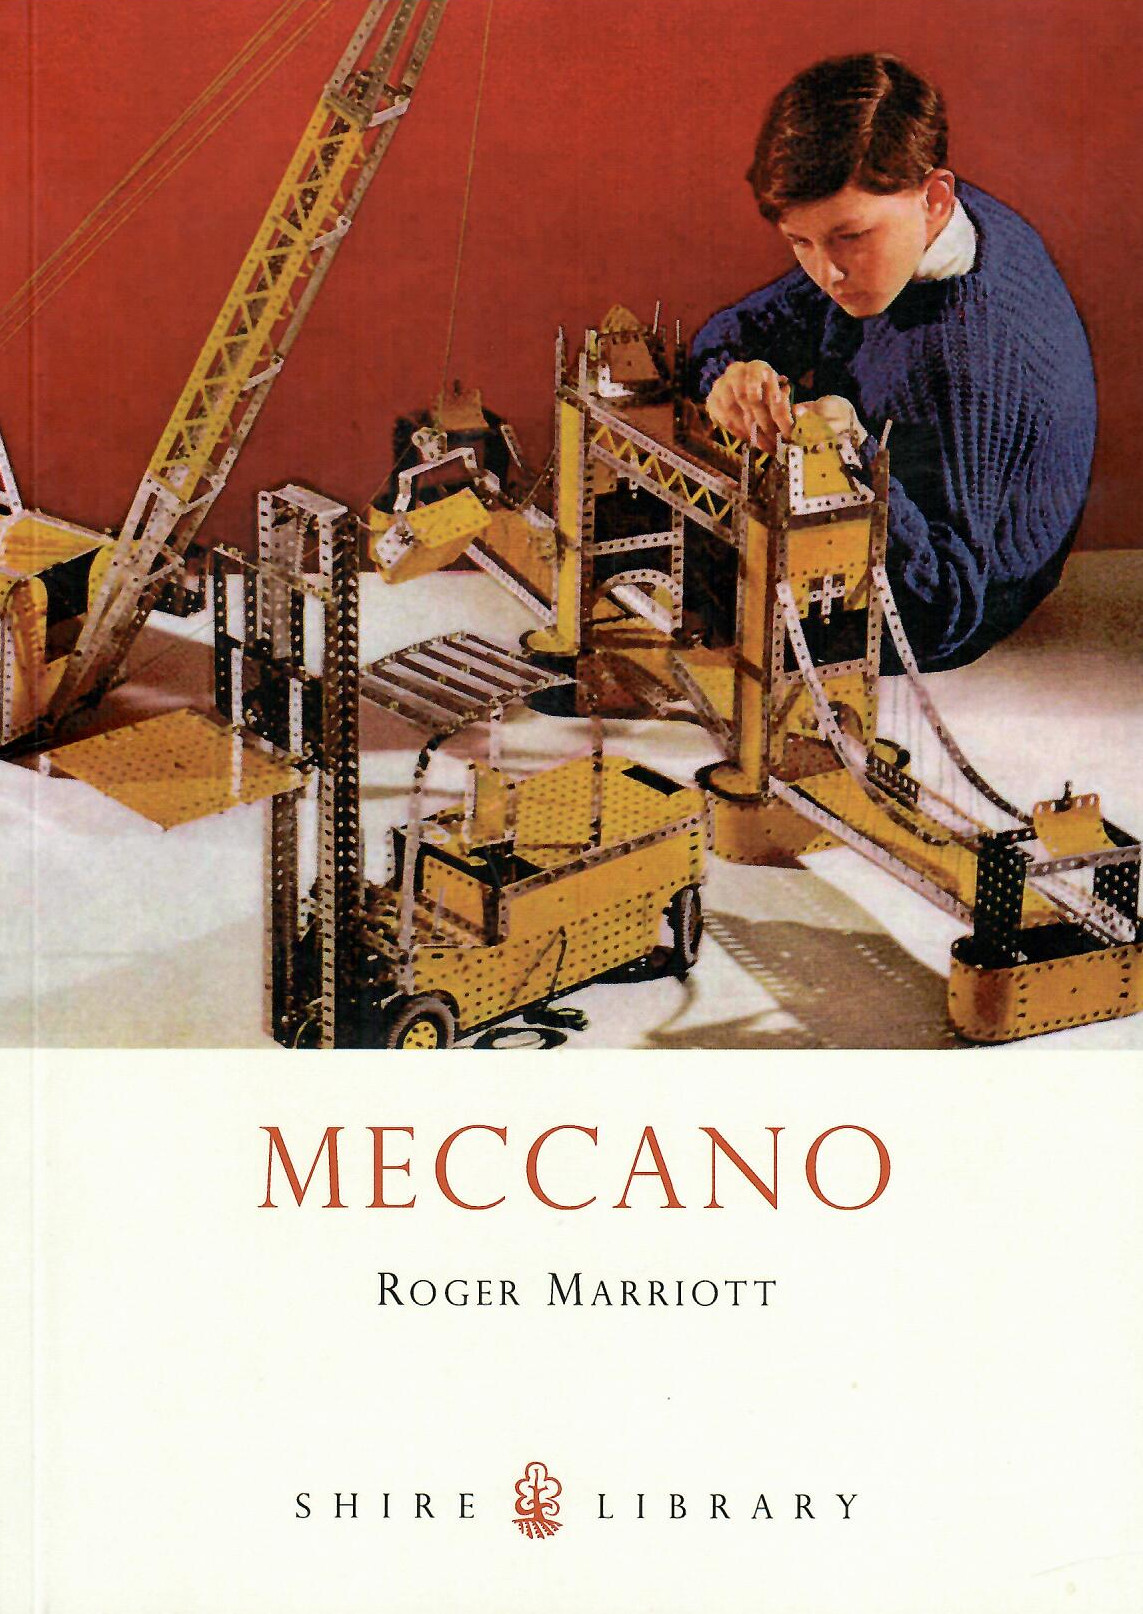 Meccano by Roger Marriot